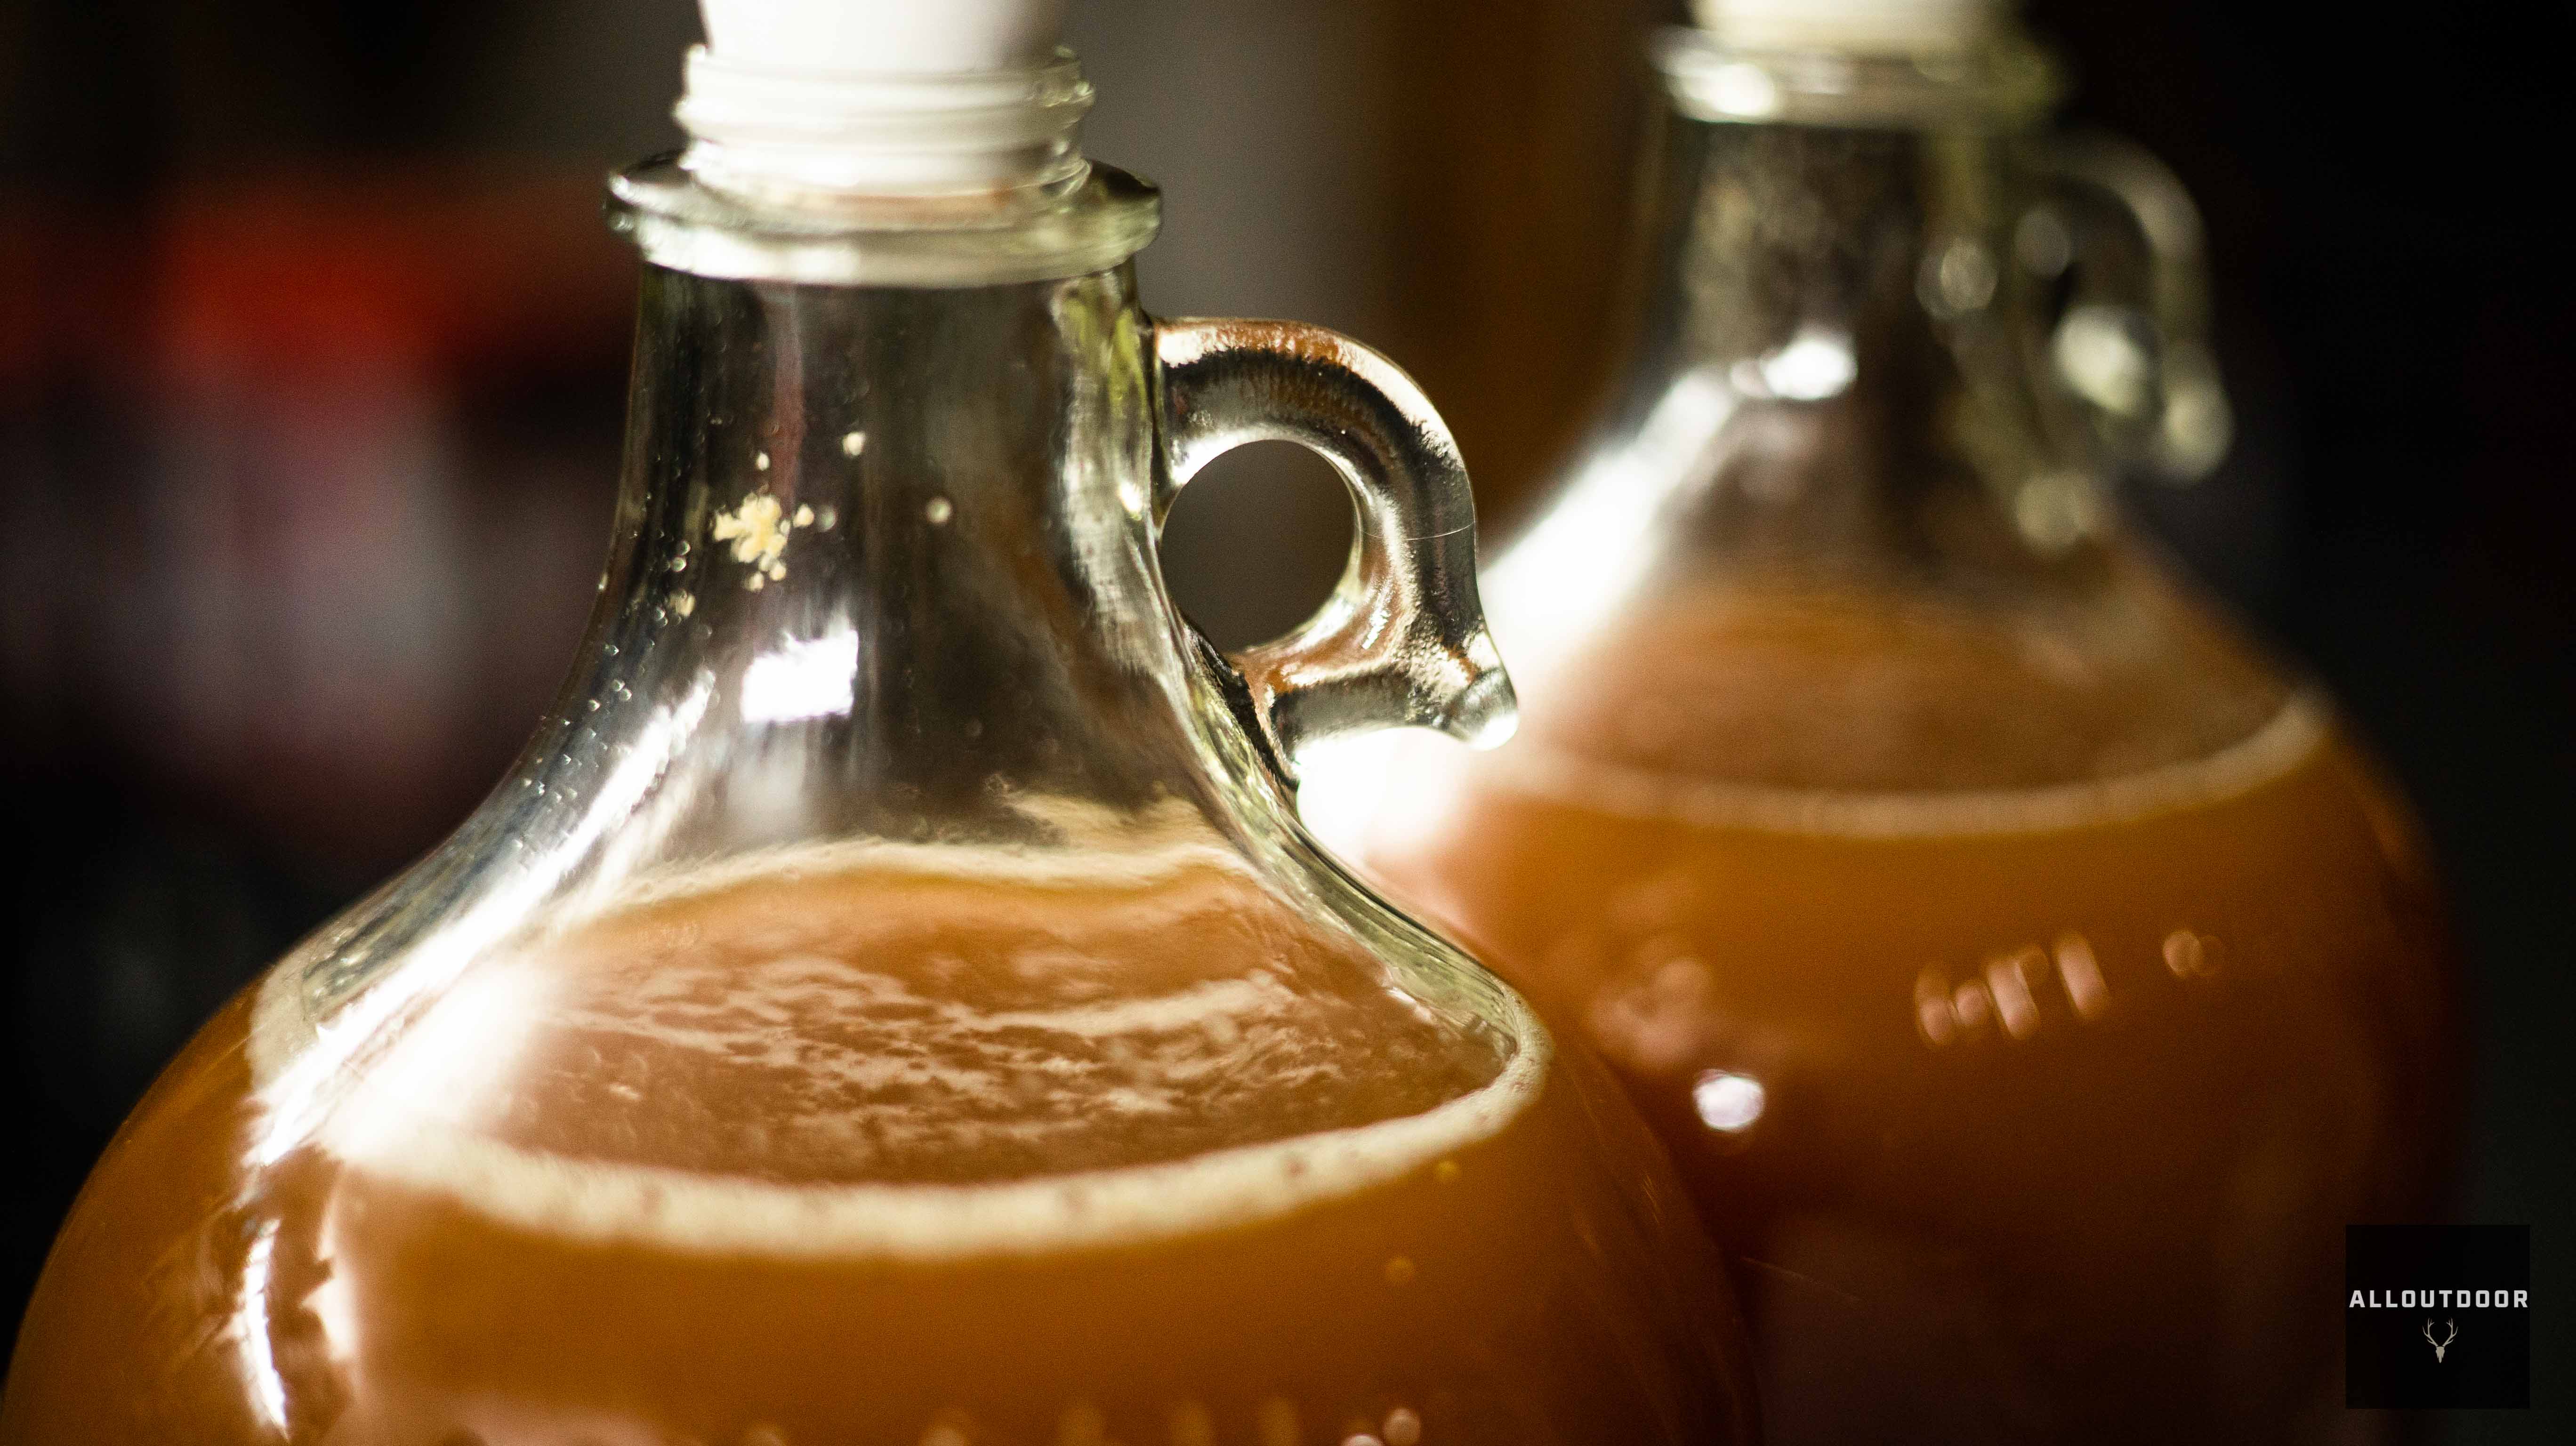 DIY Project - Pressing your Own Homemade Hard Apple Cider, Part 1